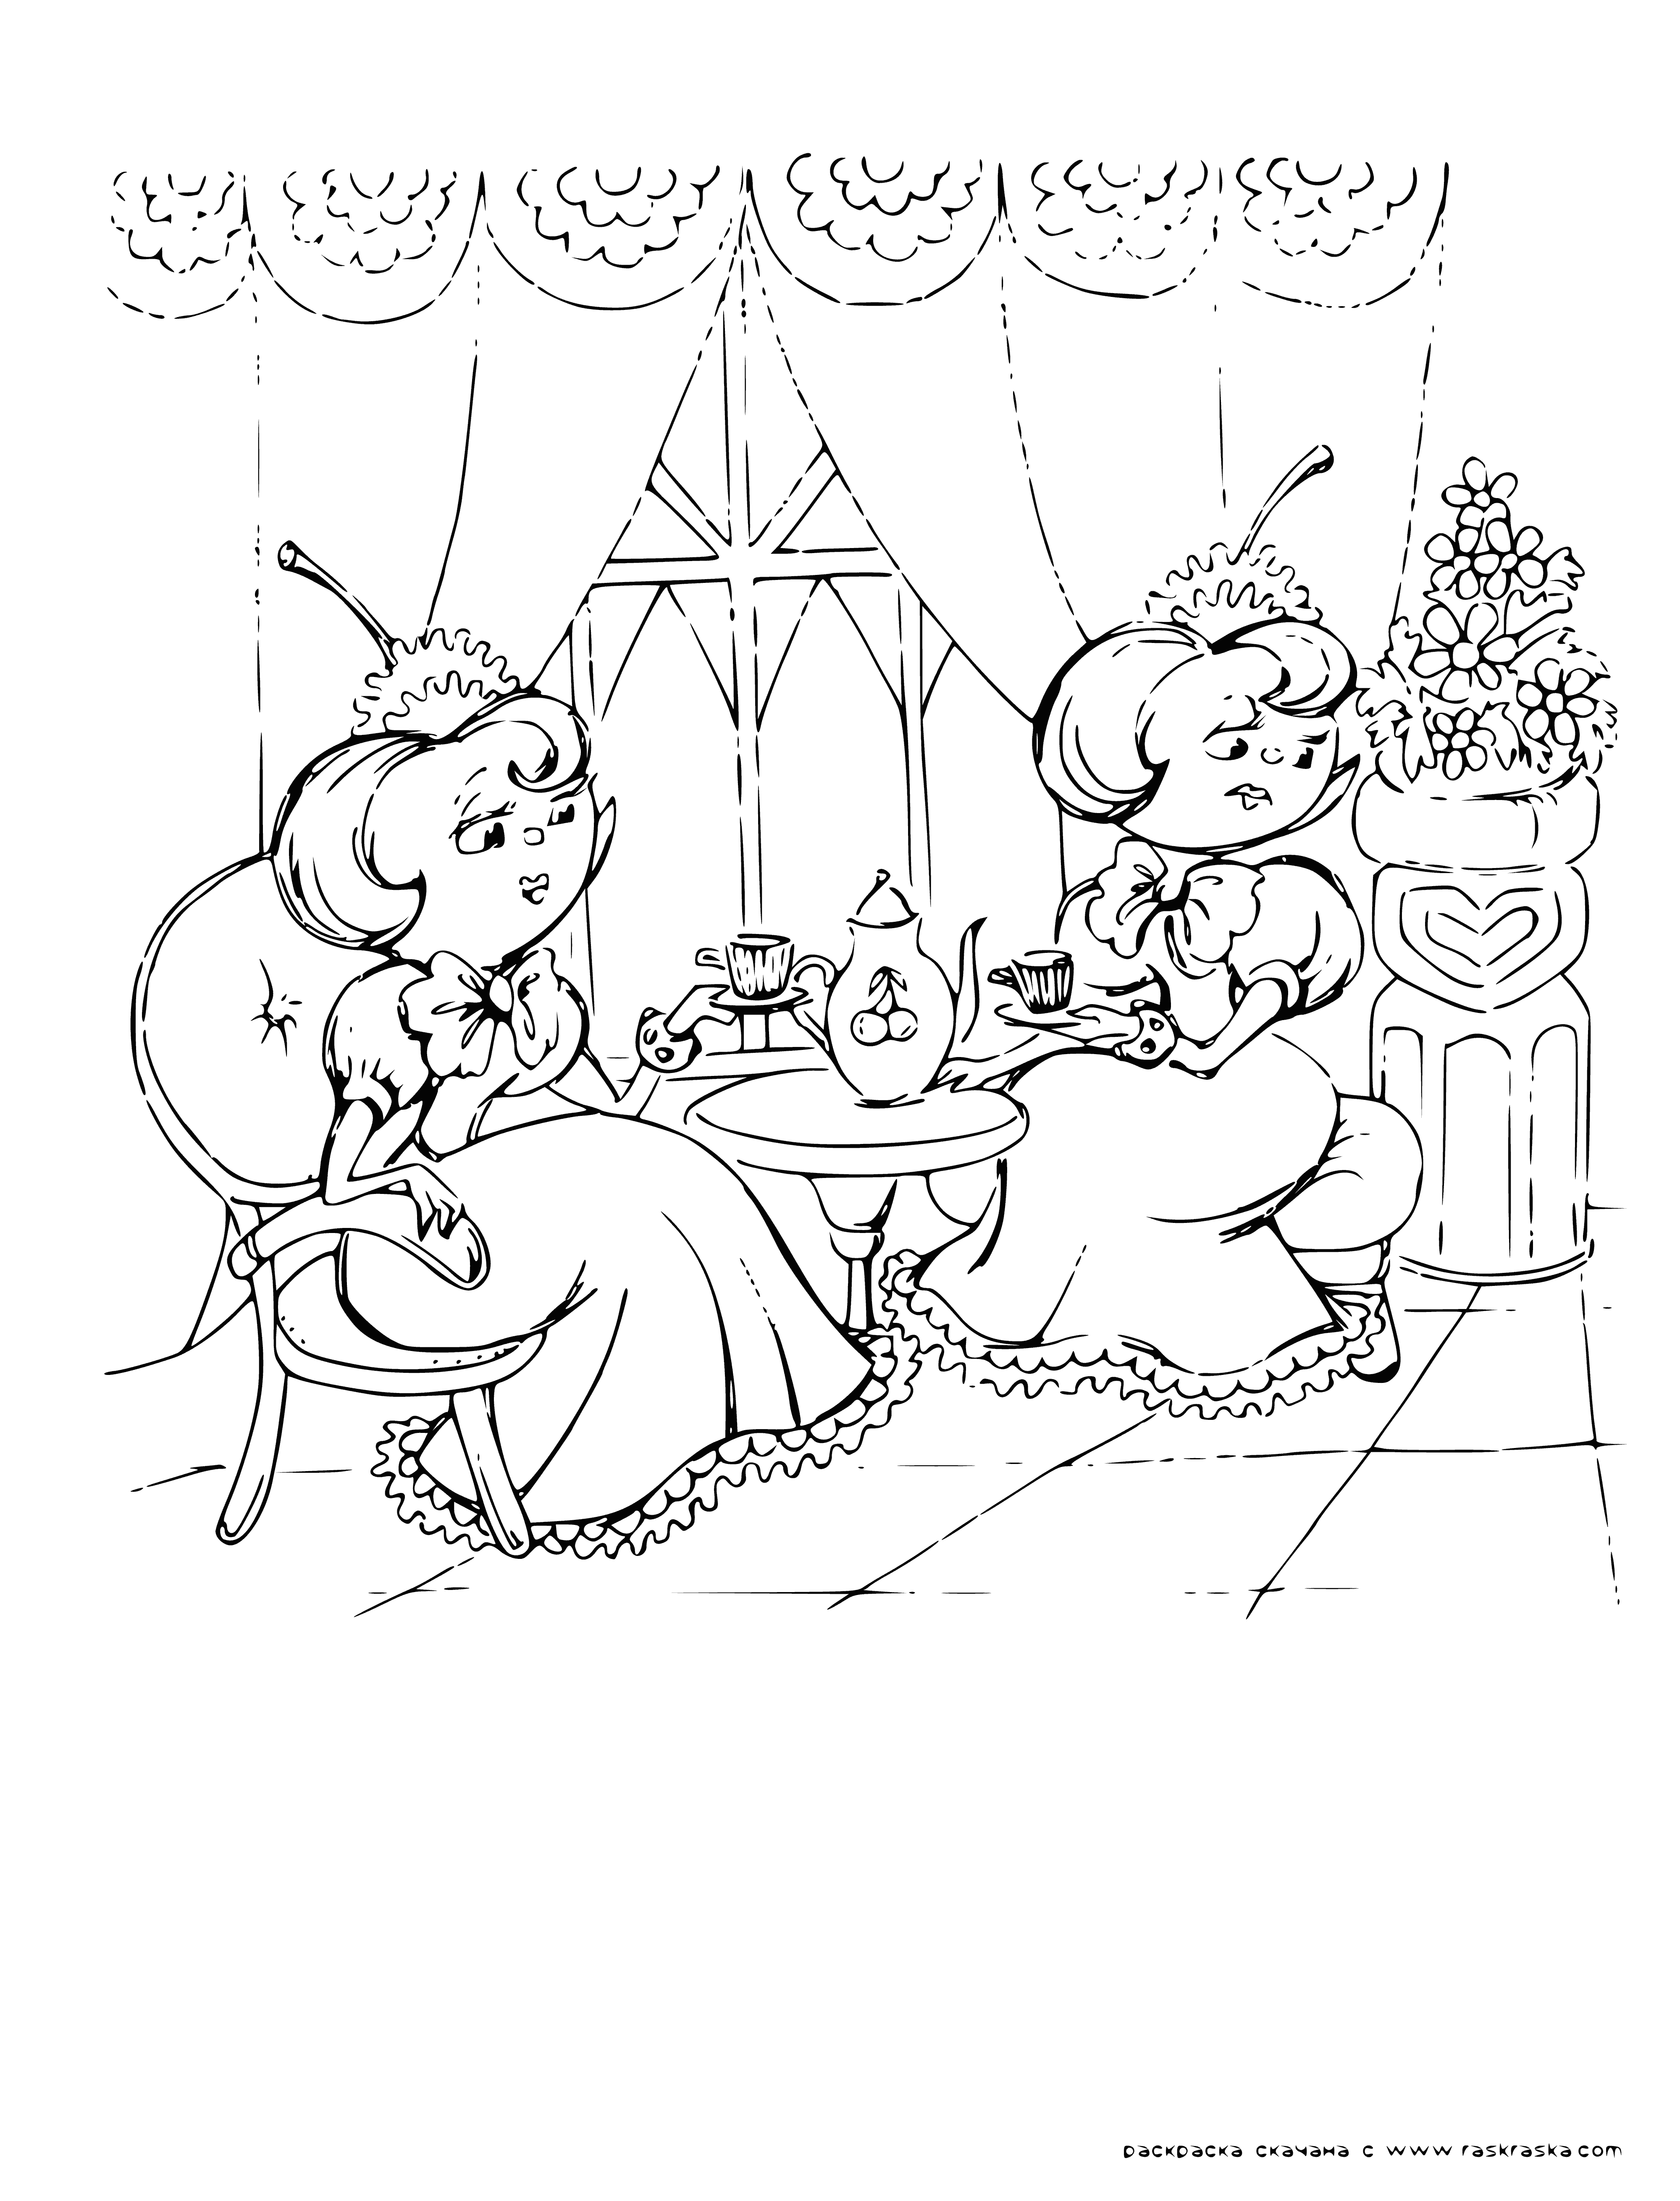 coloring page: A man wearing a red suit tells the story of Cipollino, a brave boy who stands up for justice. His friends hatch a plan to save him, and the story ends happily as the crowd applauds.